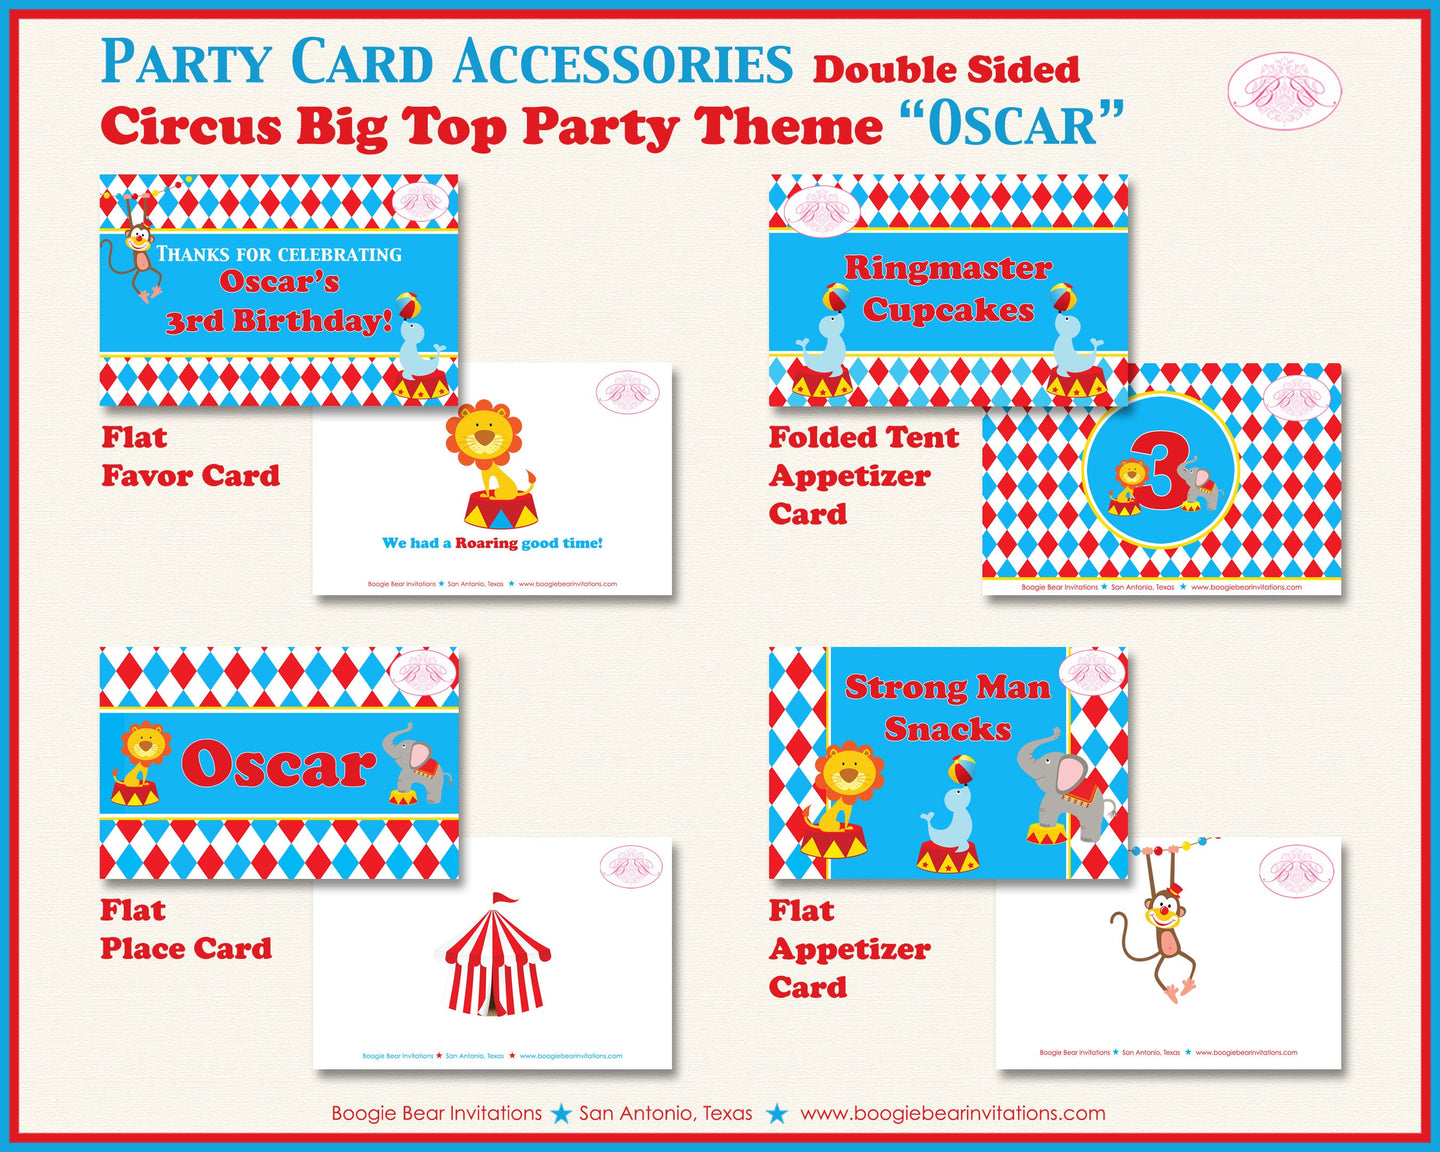 Circus Birthday Favor Party Card Tent Appetizer Place Big Top 3 Ring Animals Red Blue Boy Girl Harlequin Boogie Bear Invitations Oscar Theme